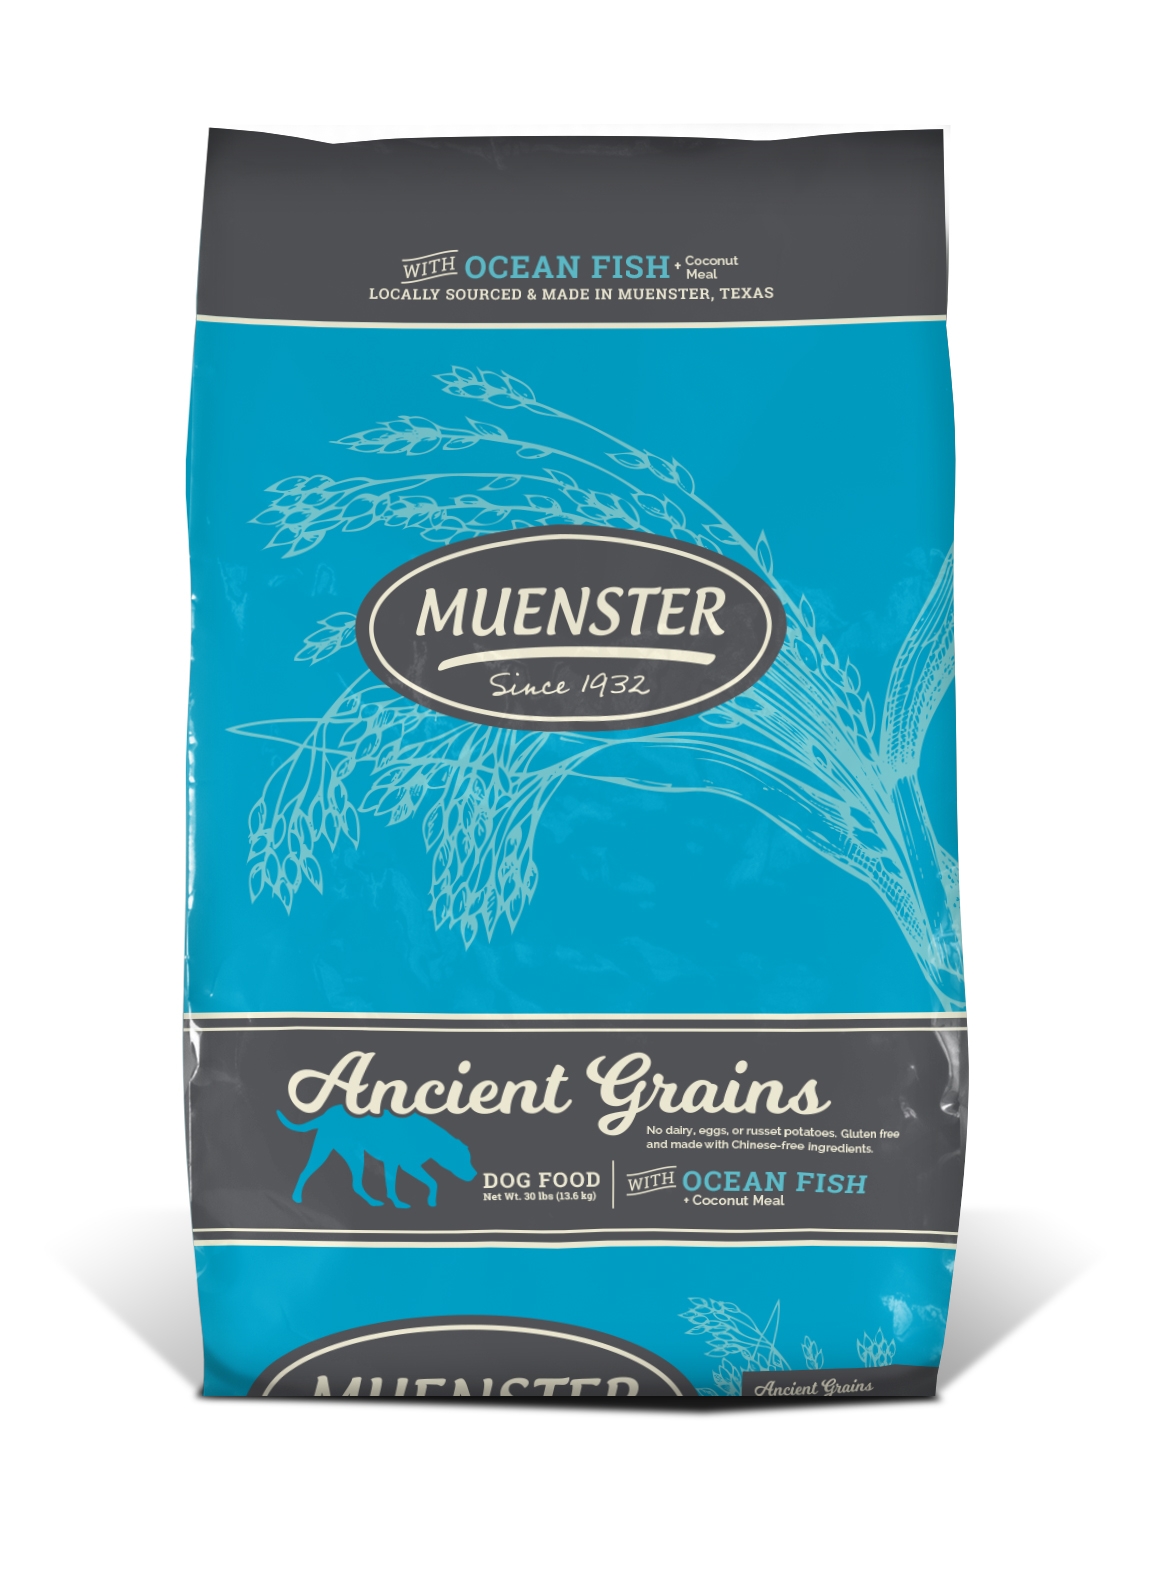 Muenster Ancient Grains with Ocean Fish Dog Food, 22 lbs